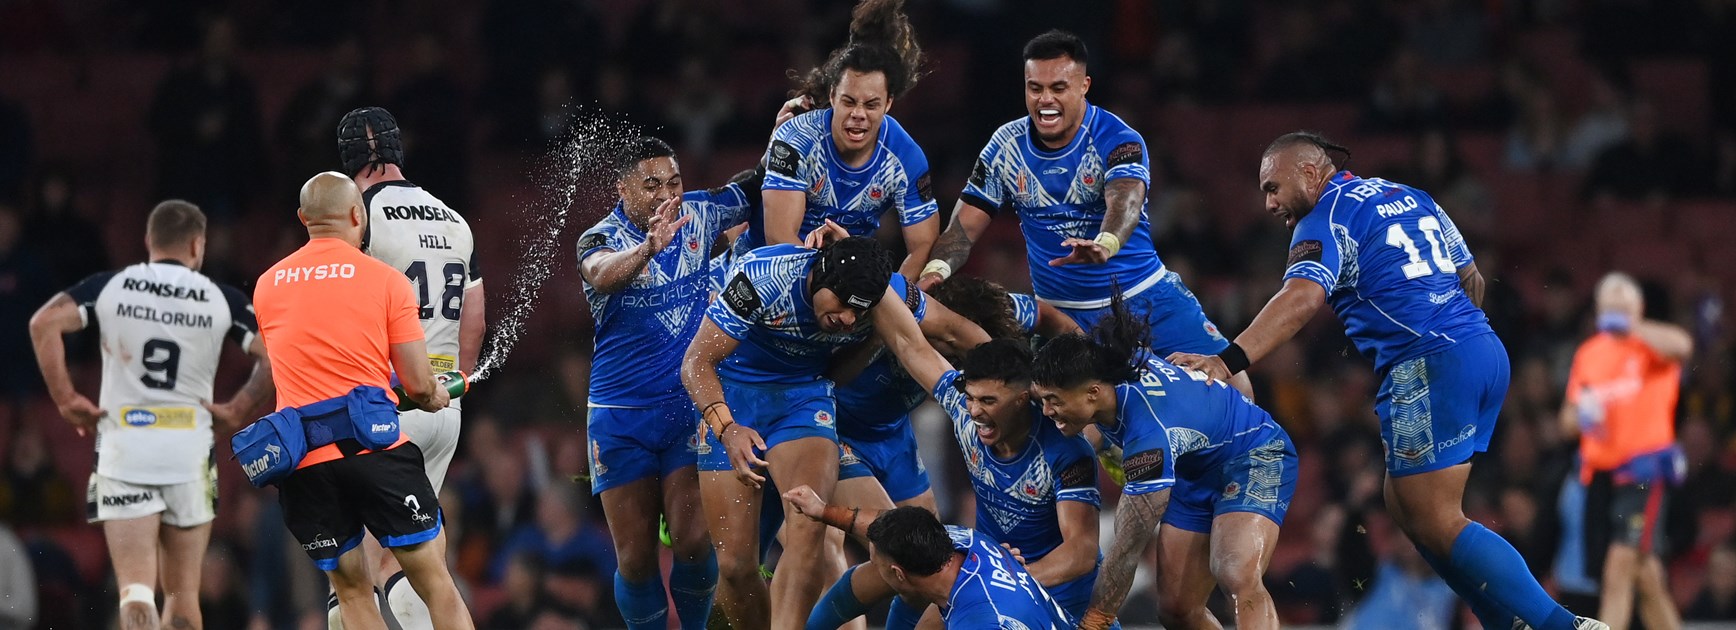 Samoa out to make new history in return to England for Test series